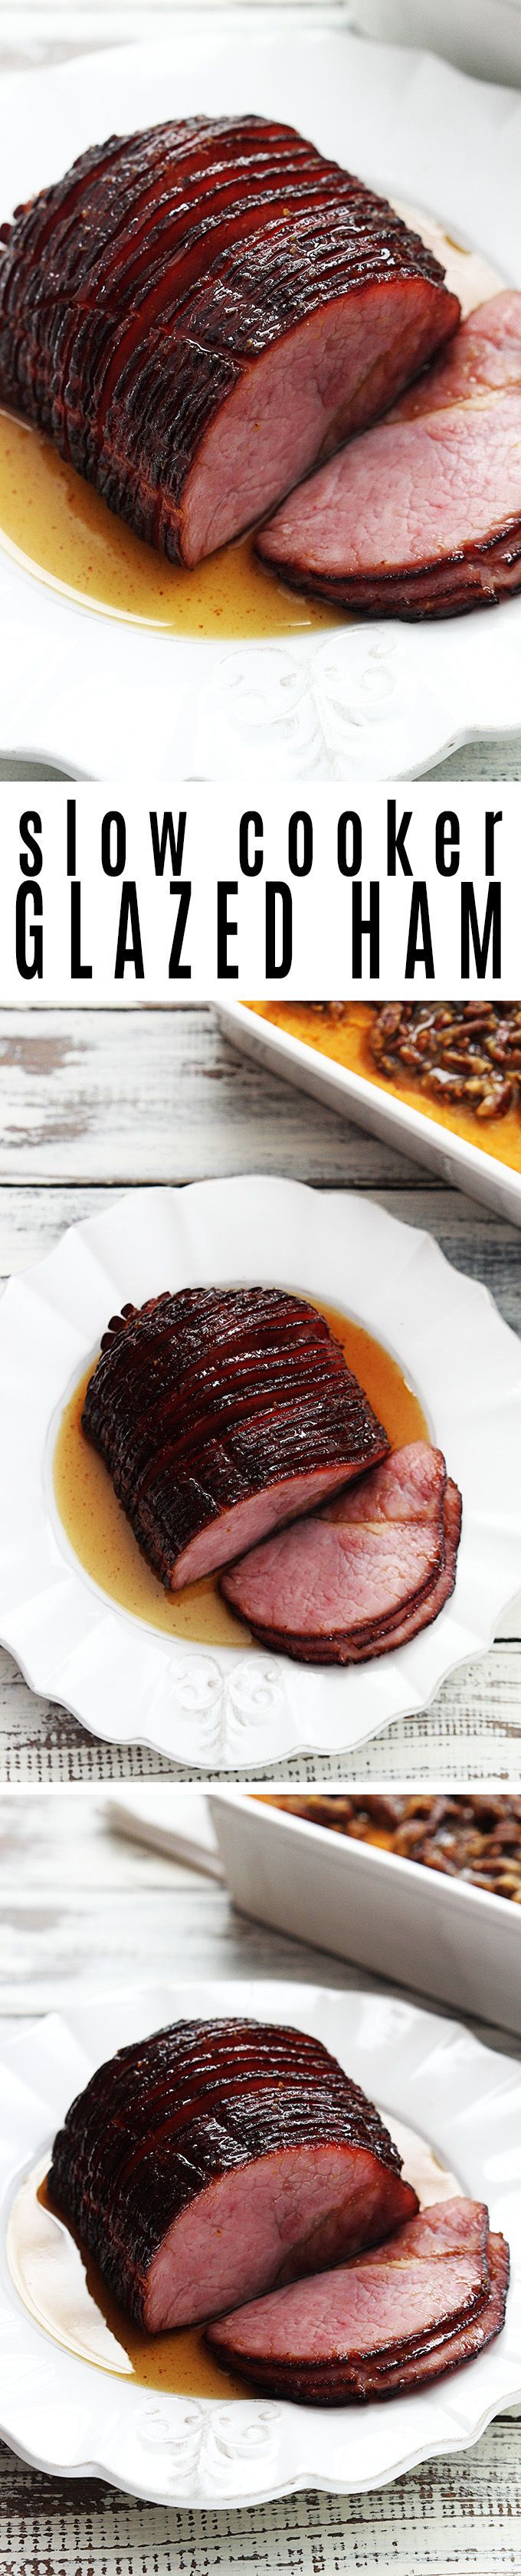 Juicy slow cooker ham with a sweet and spicy glaze.